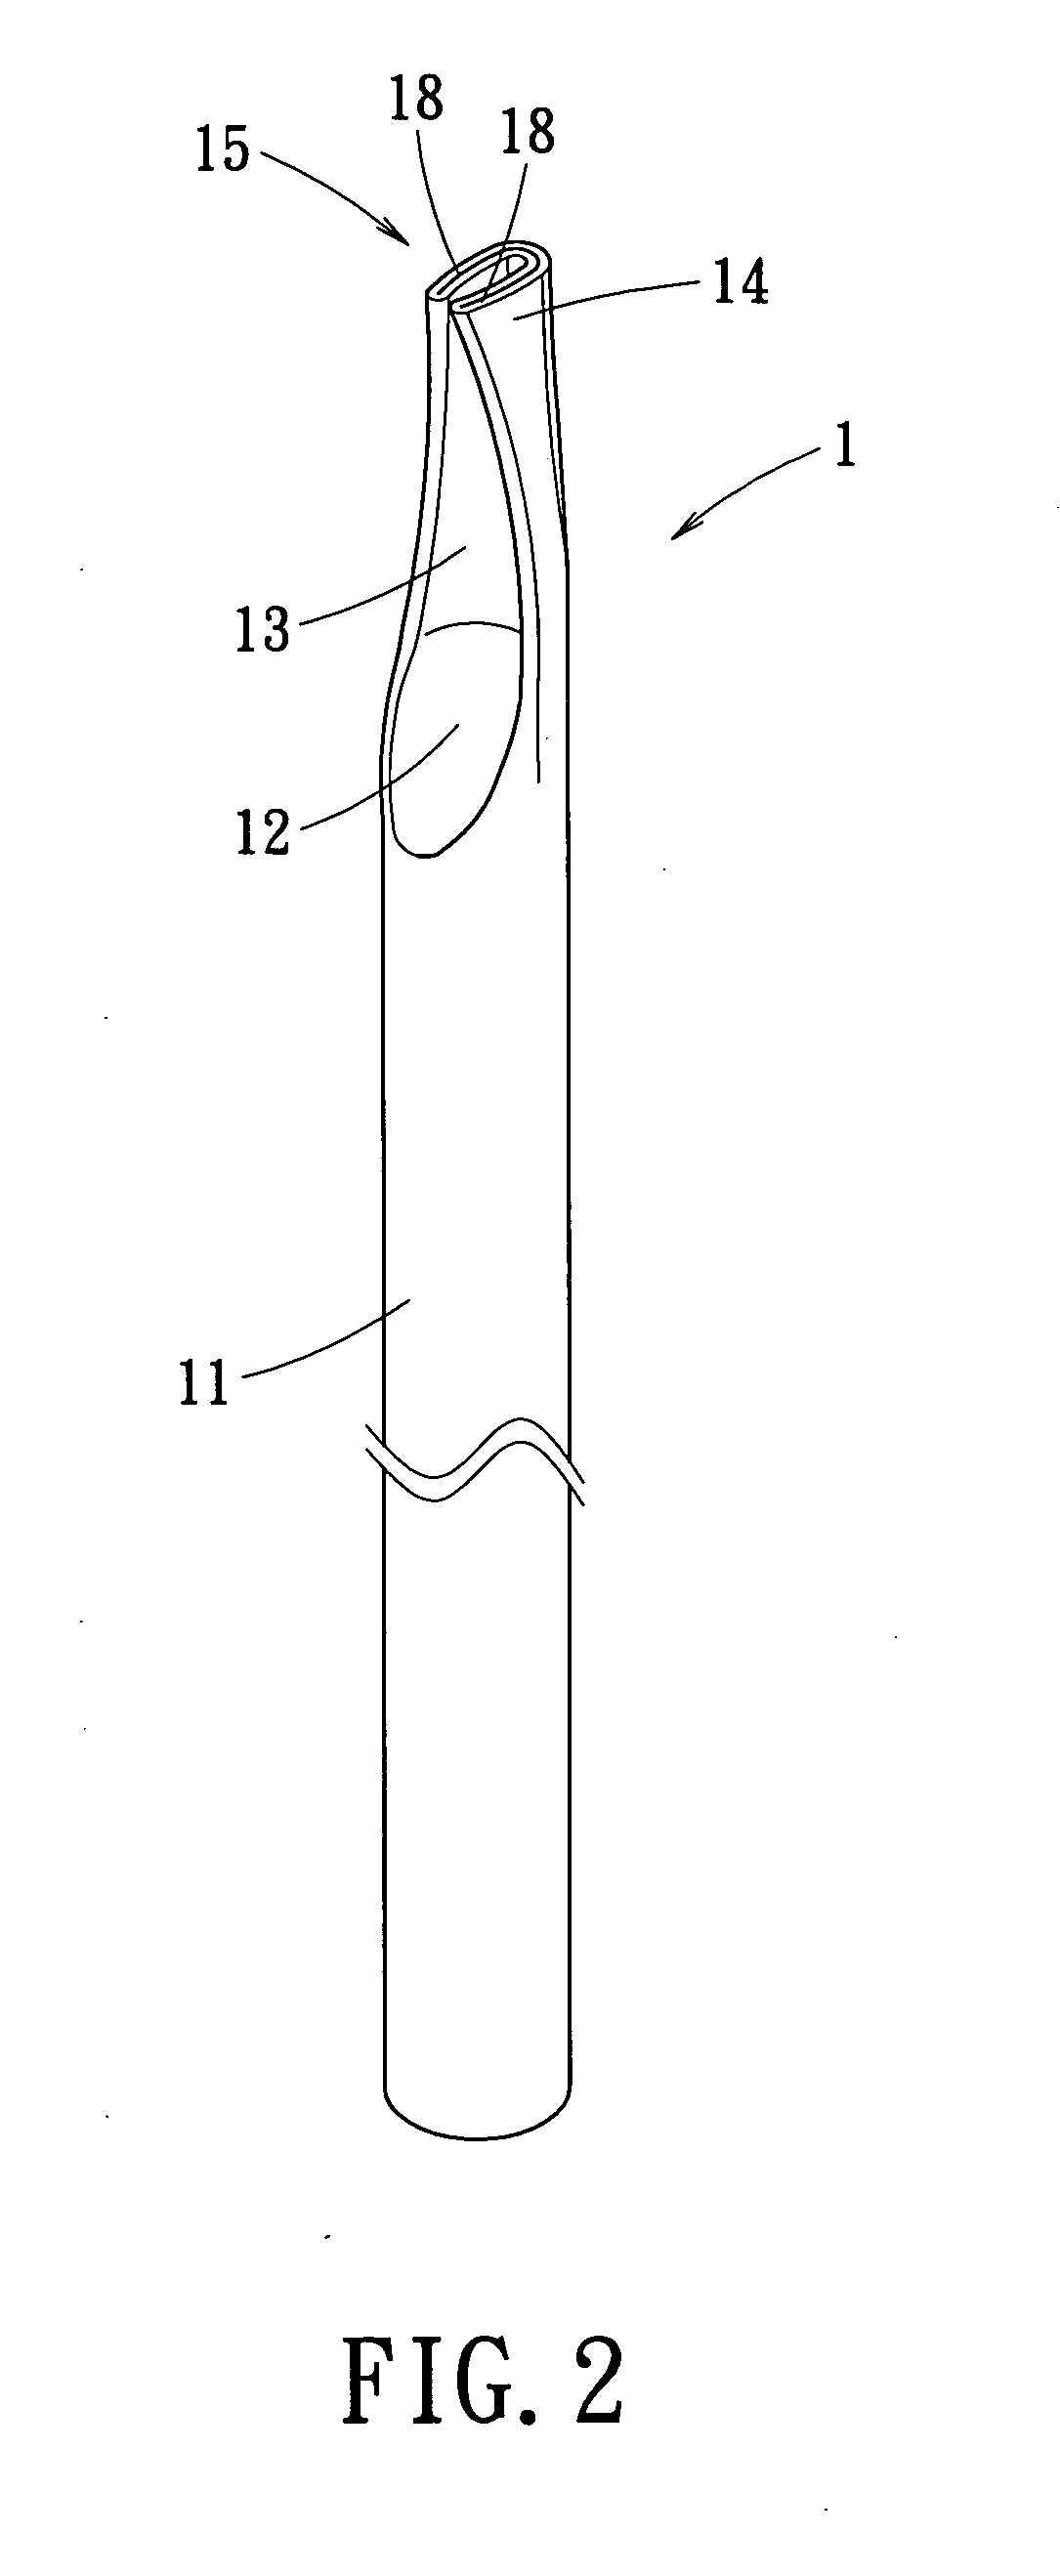 Circular tubular heat pipe having a sealed structure closing a distal opening thereof